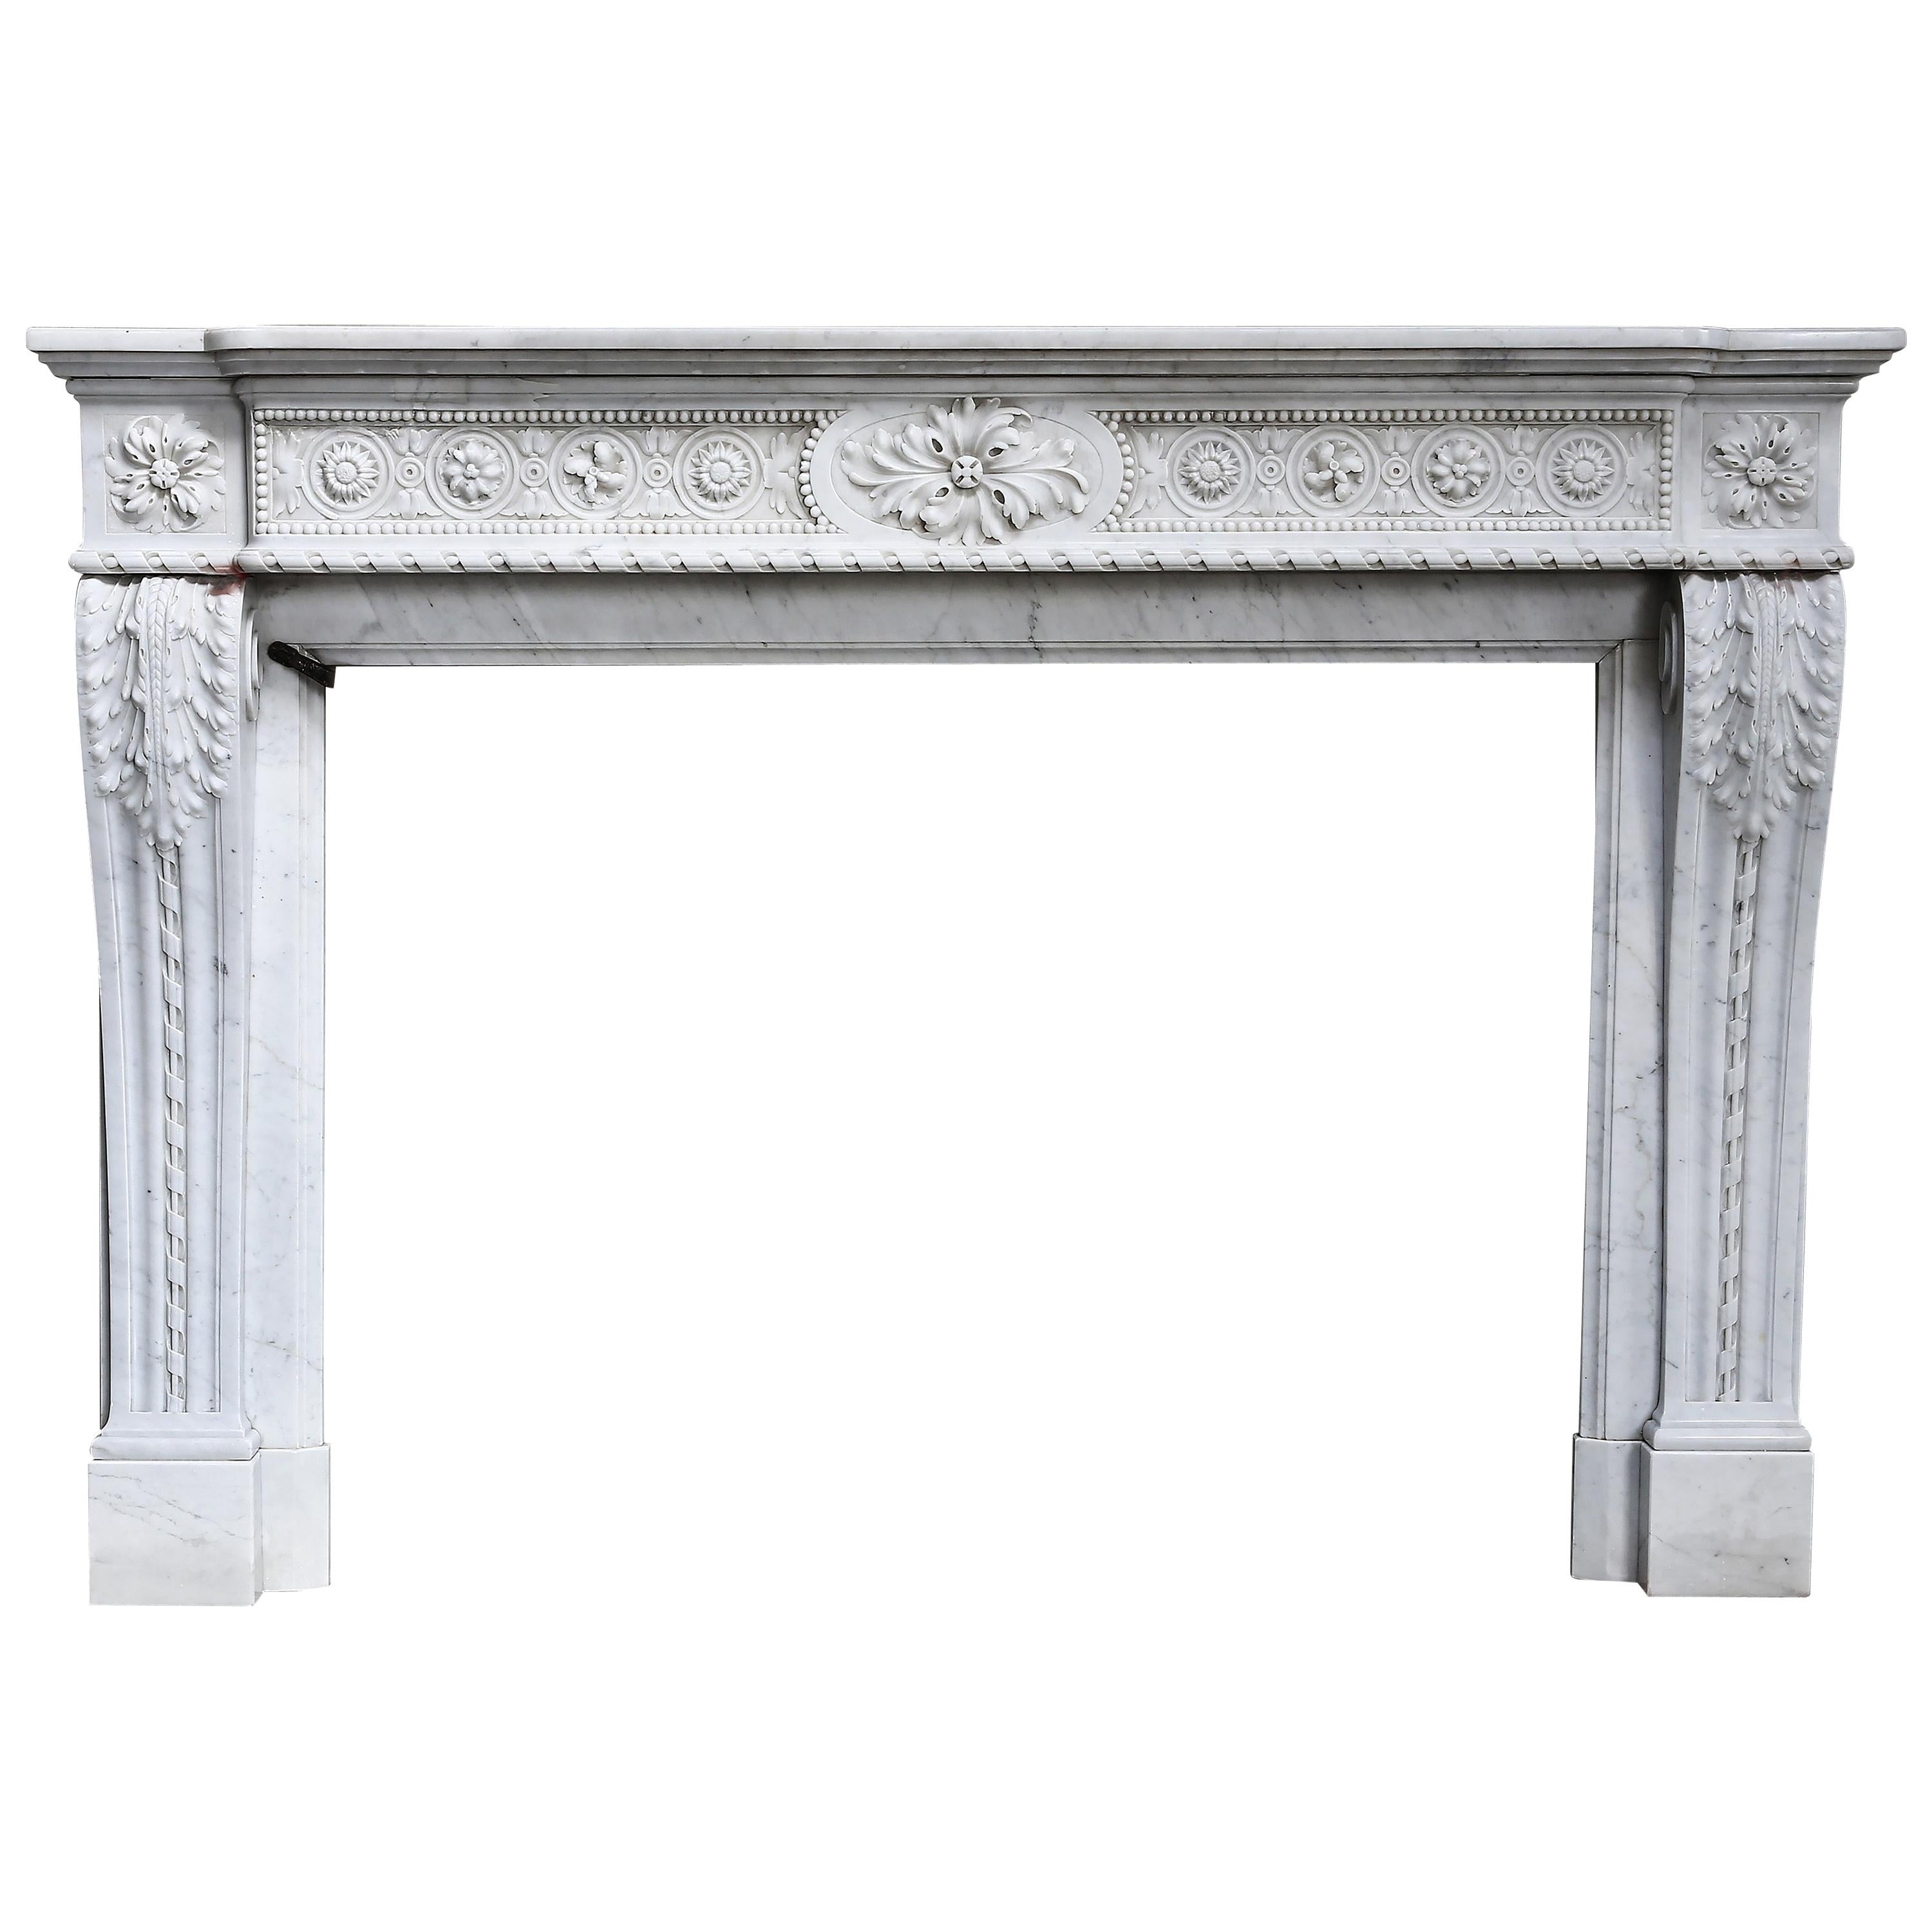 Antique Unique Fireplace of Carrara Marble from the 18th Century For Sale